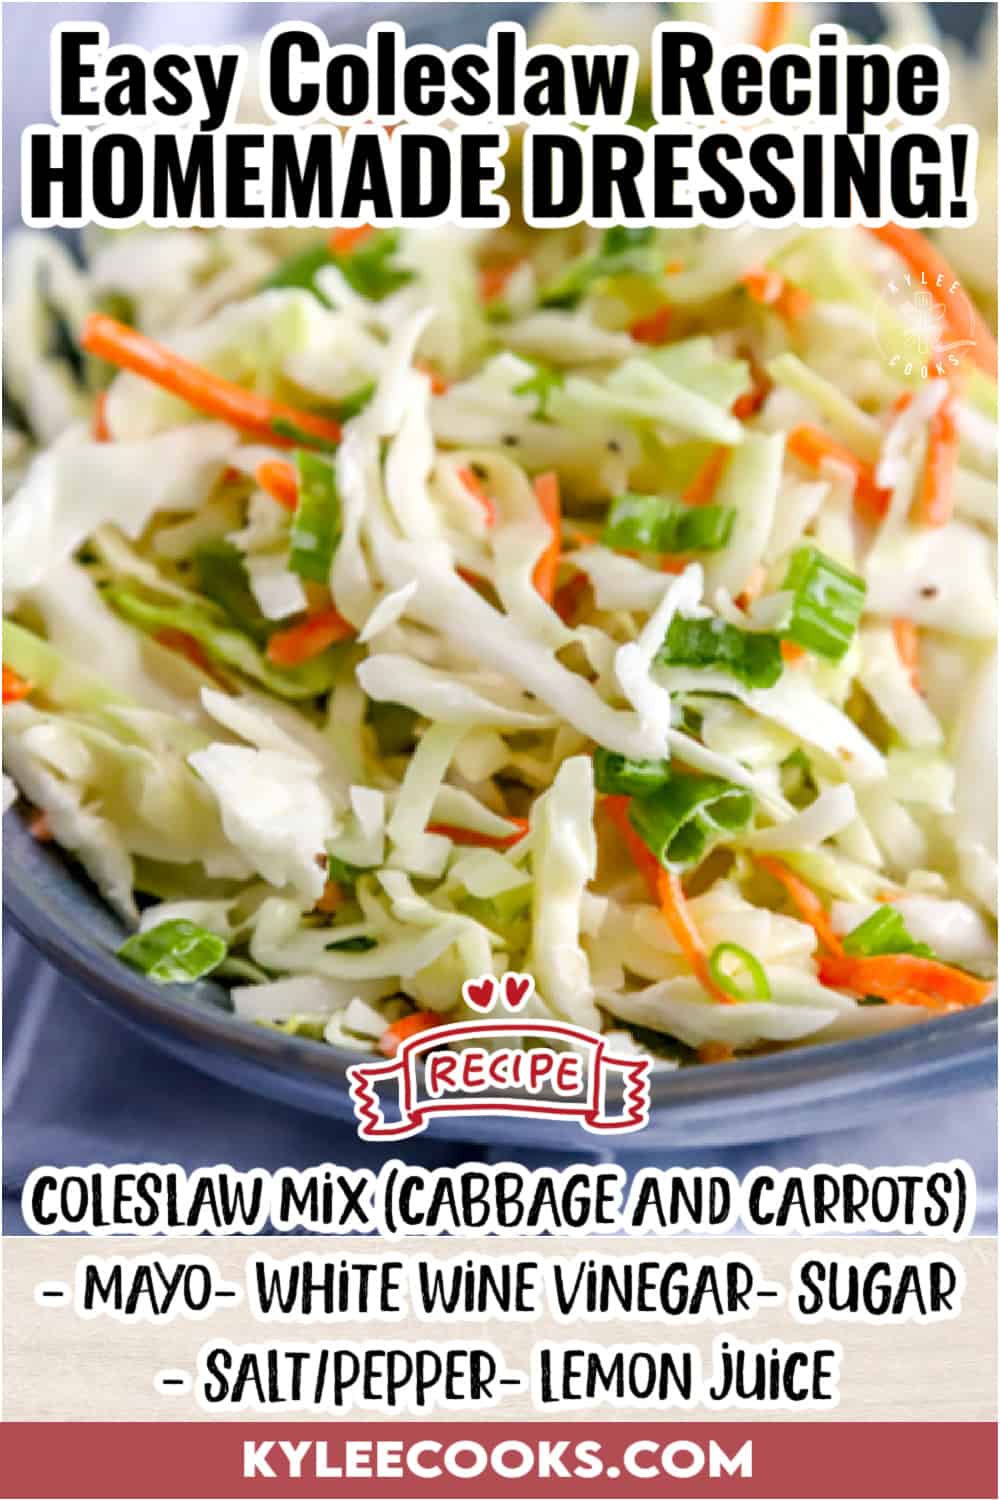 homemade coleslaw in a blue bowl with recipe name and ingredients overlaid in text.